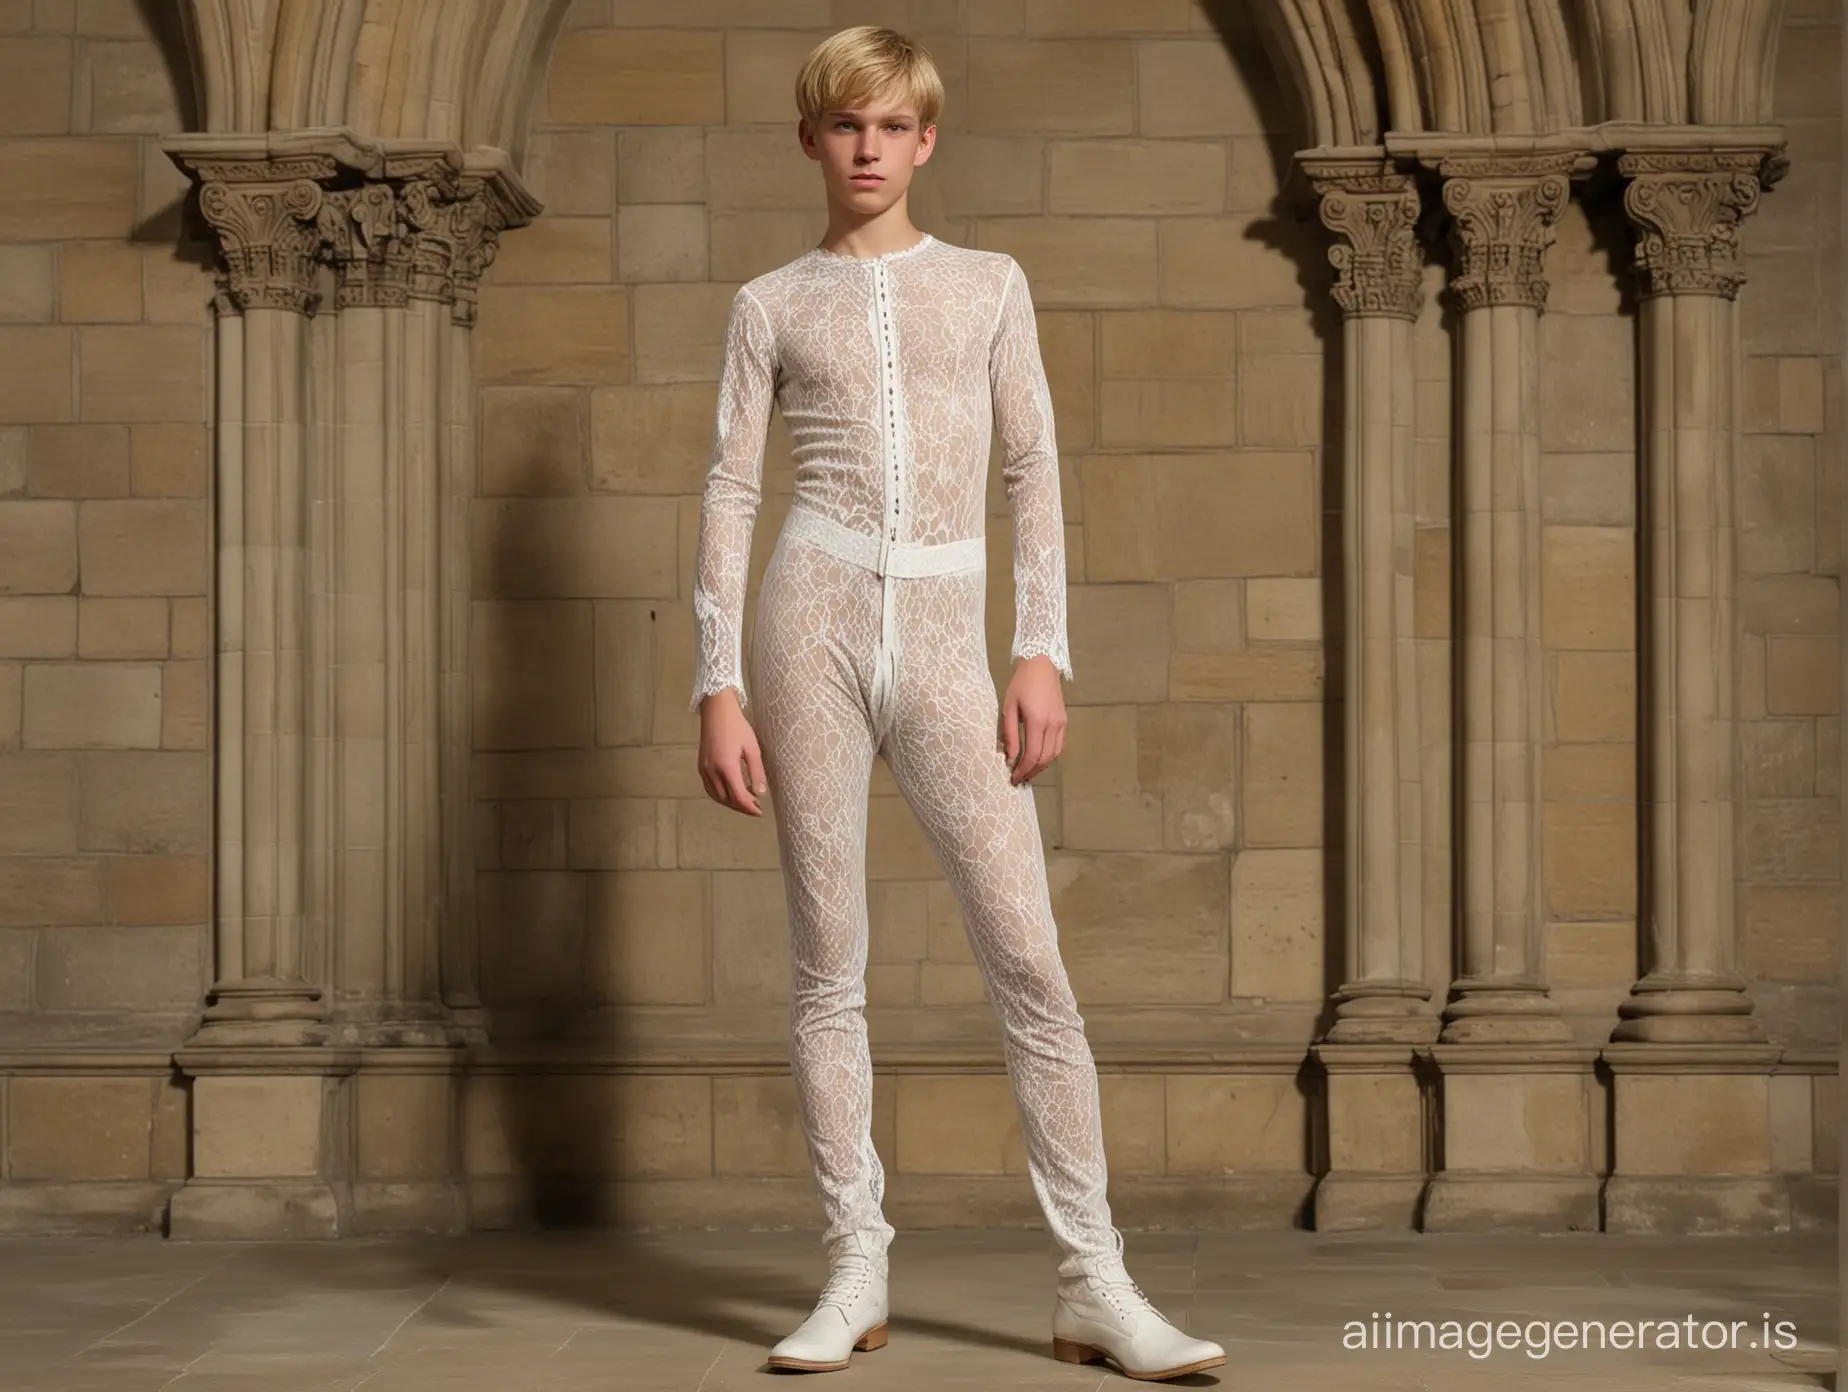 Slim-Blonde-Boy-in-SkinTight-Lace-Jumpsuit-Stands-in-Gothic-Church-Nave